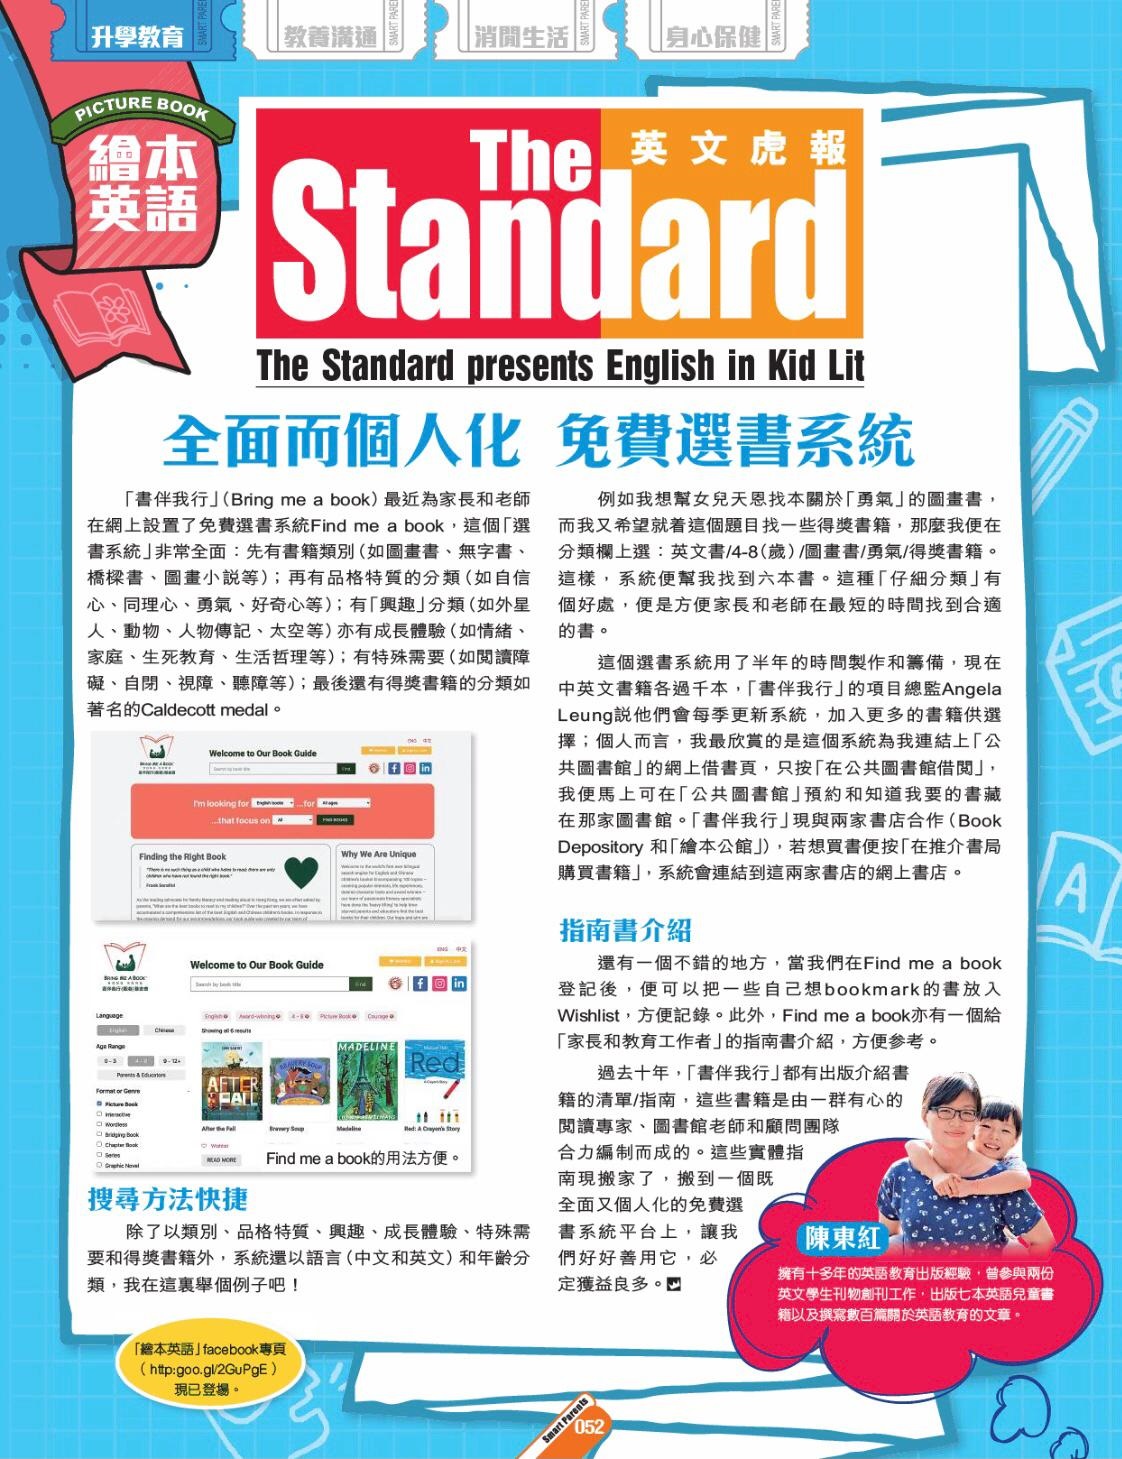 Sing Tao Smart parents _Find Me A Book